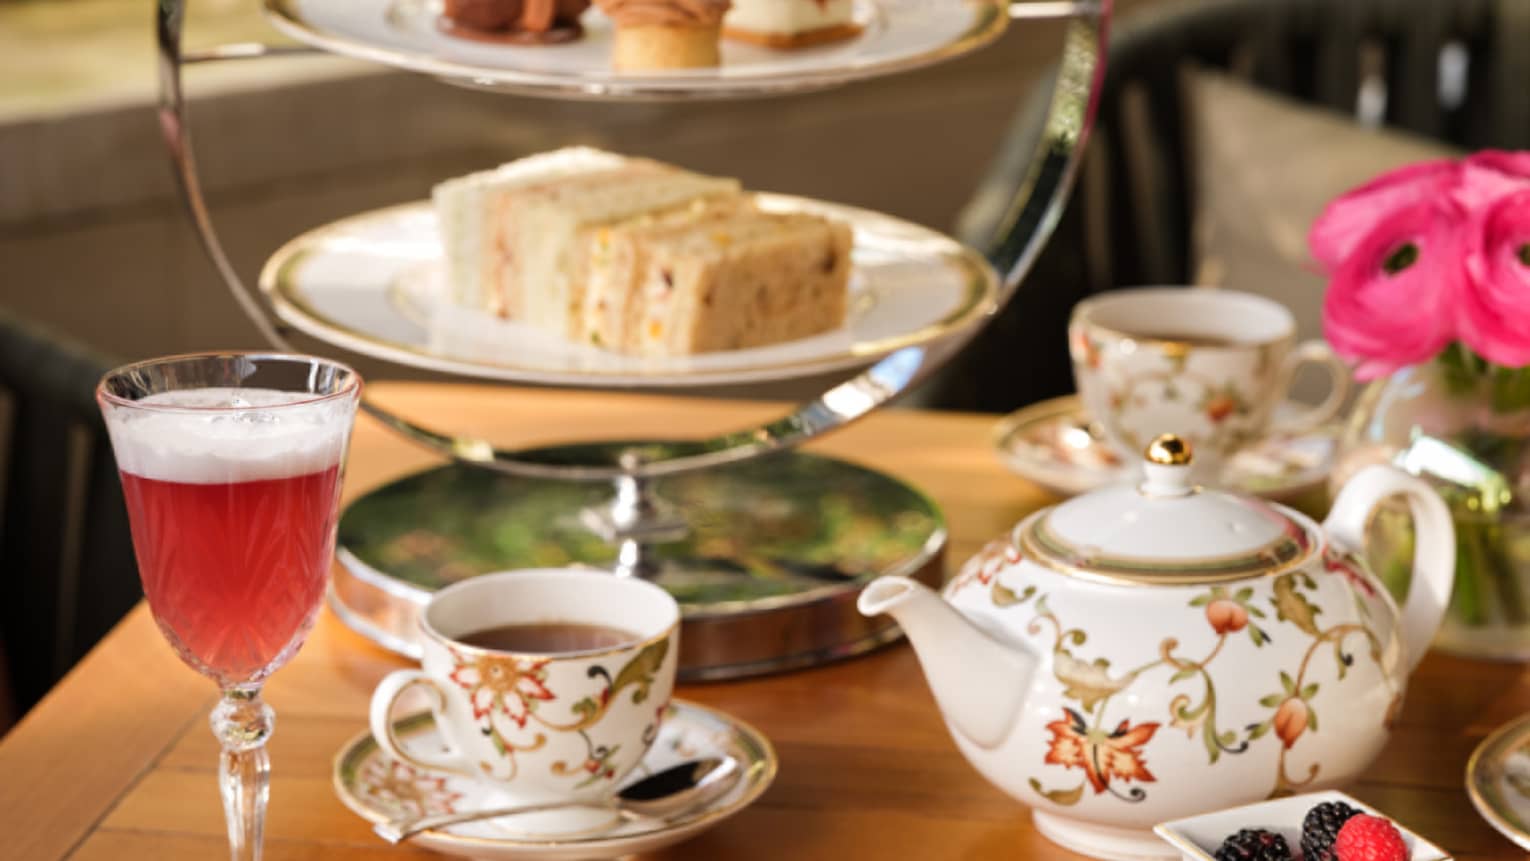 Afternoon tea service with floral teapot, cups, desserts on tiered tray